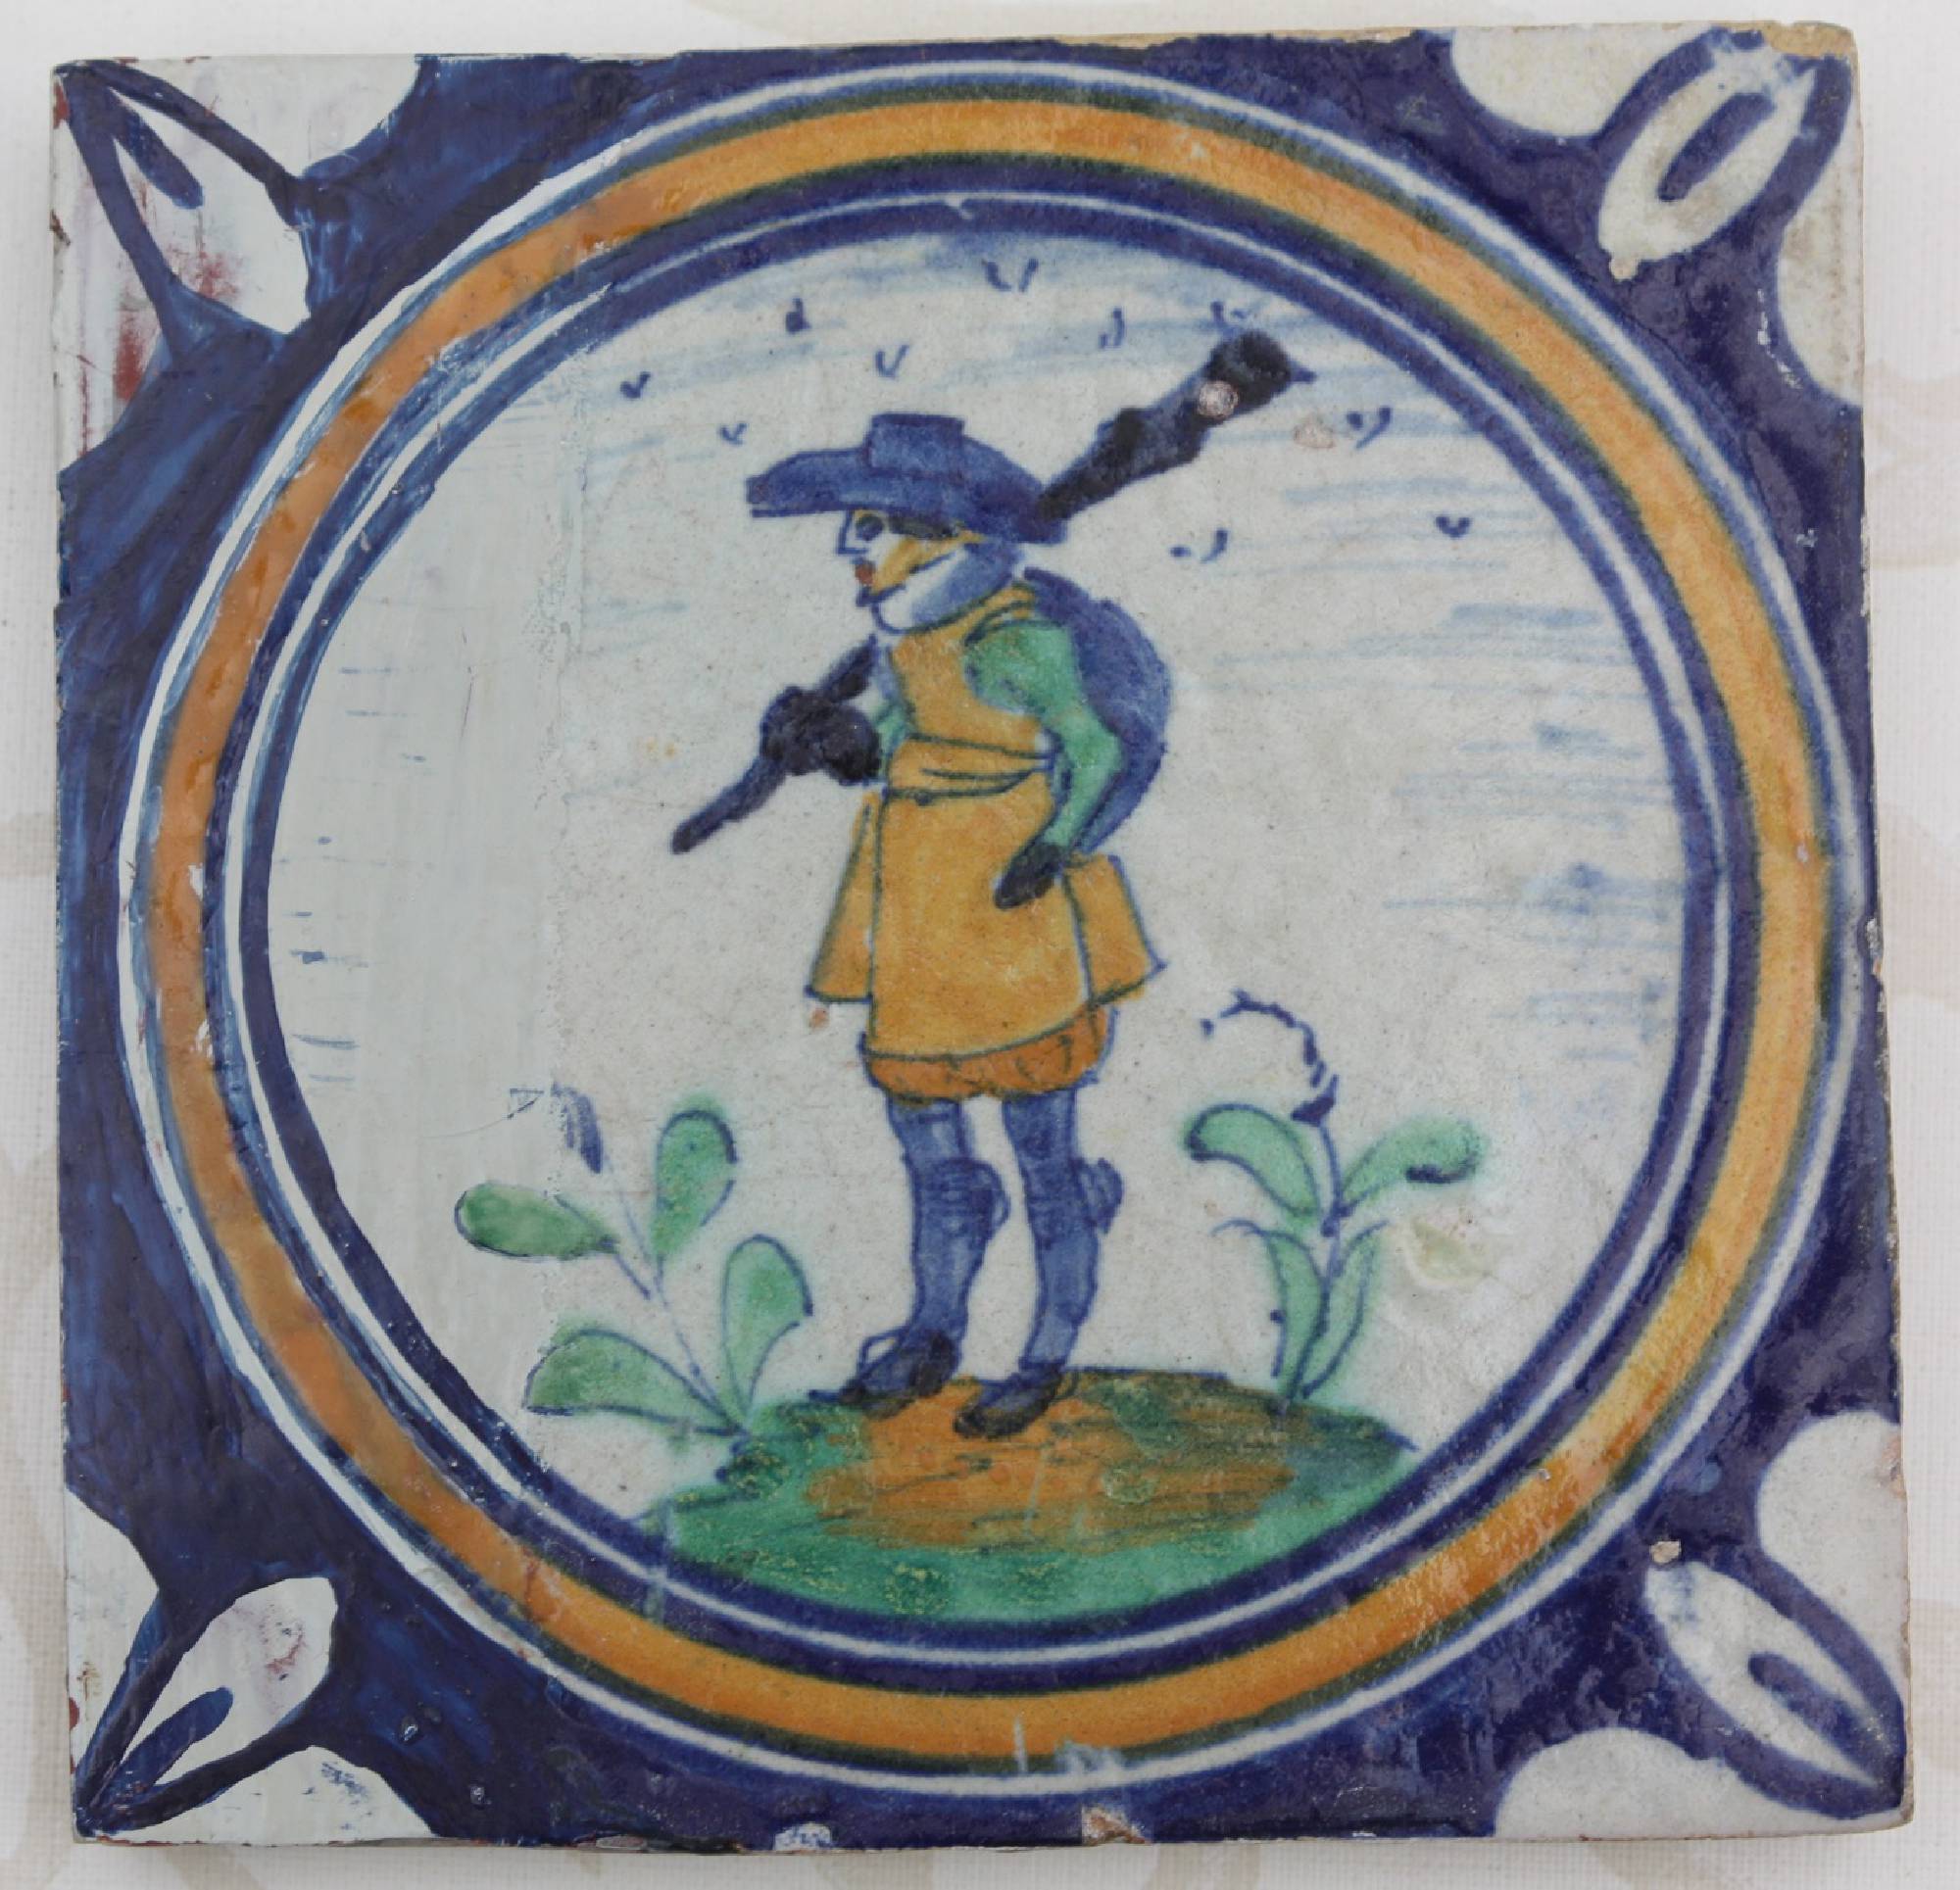 First half 17th century hand-painted antique polychrome Dutch stoneware medallion tile, showing a musketeer